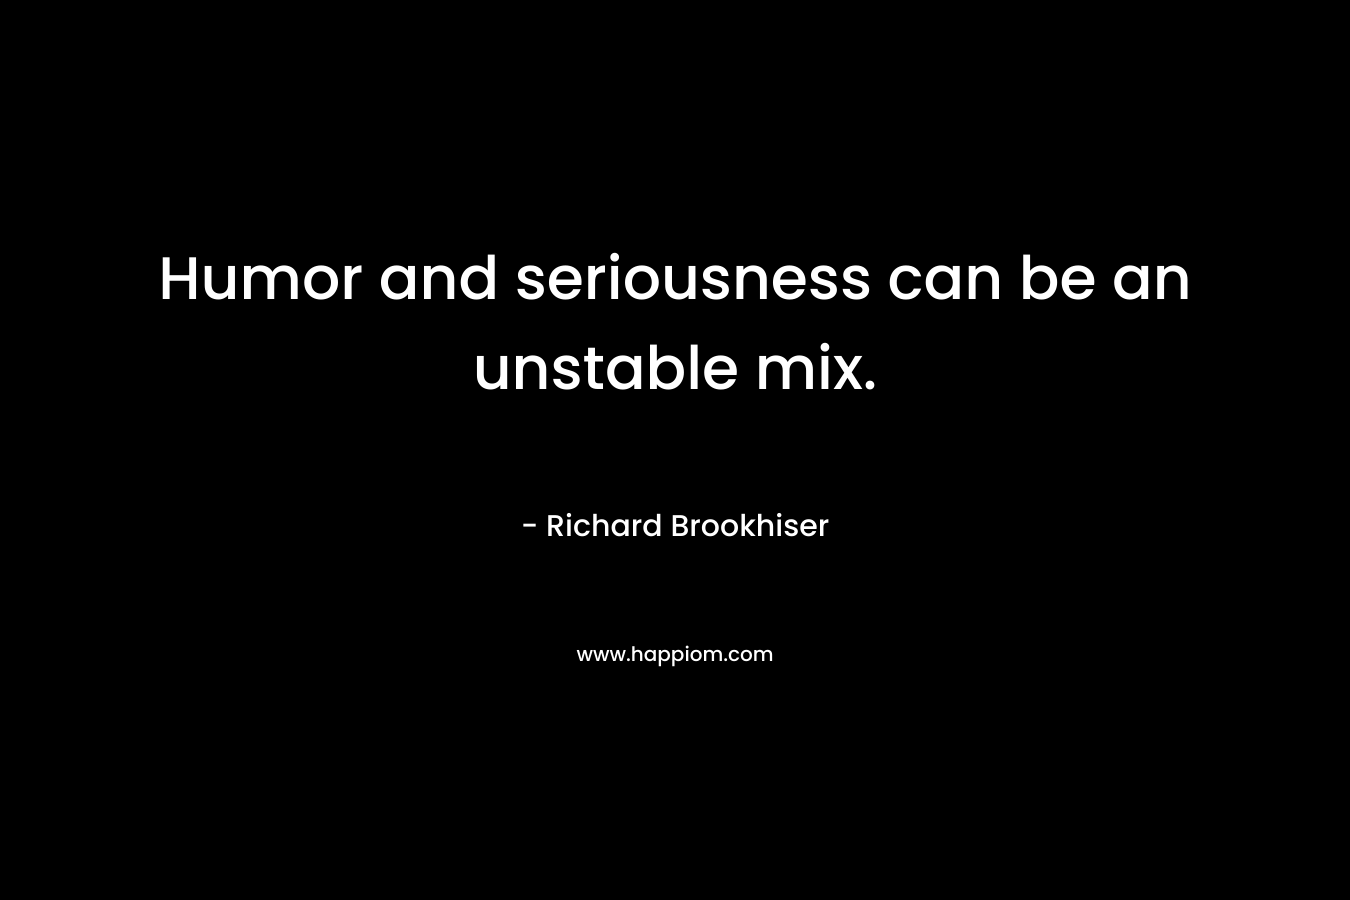 Humor and seriousness can be an unstable mix. – Richard Brookhiser